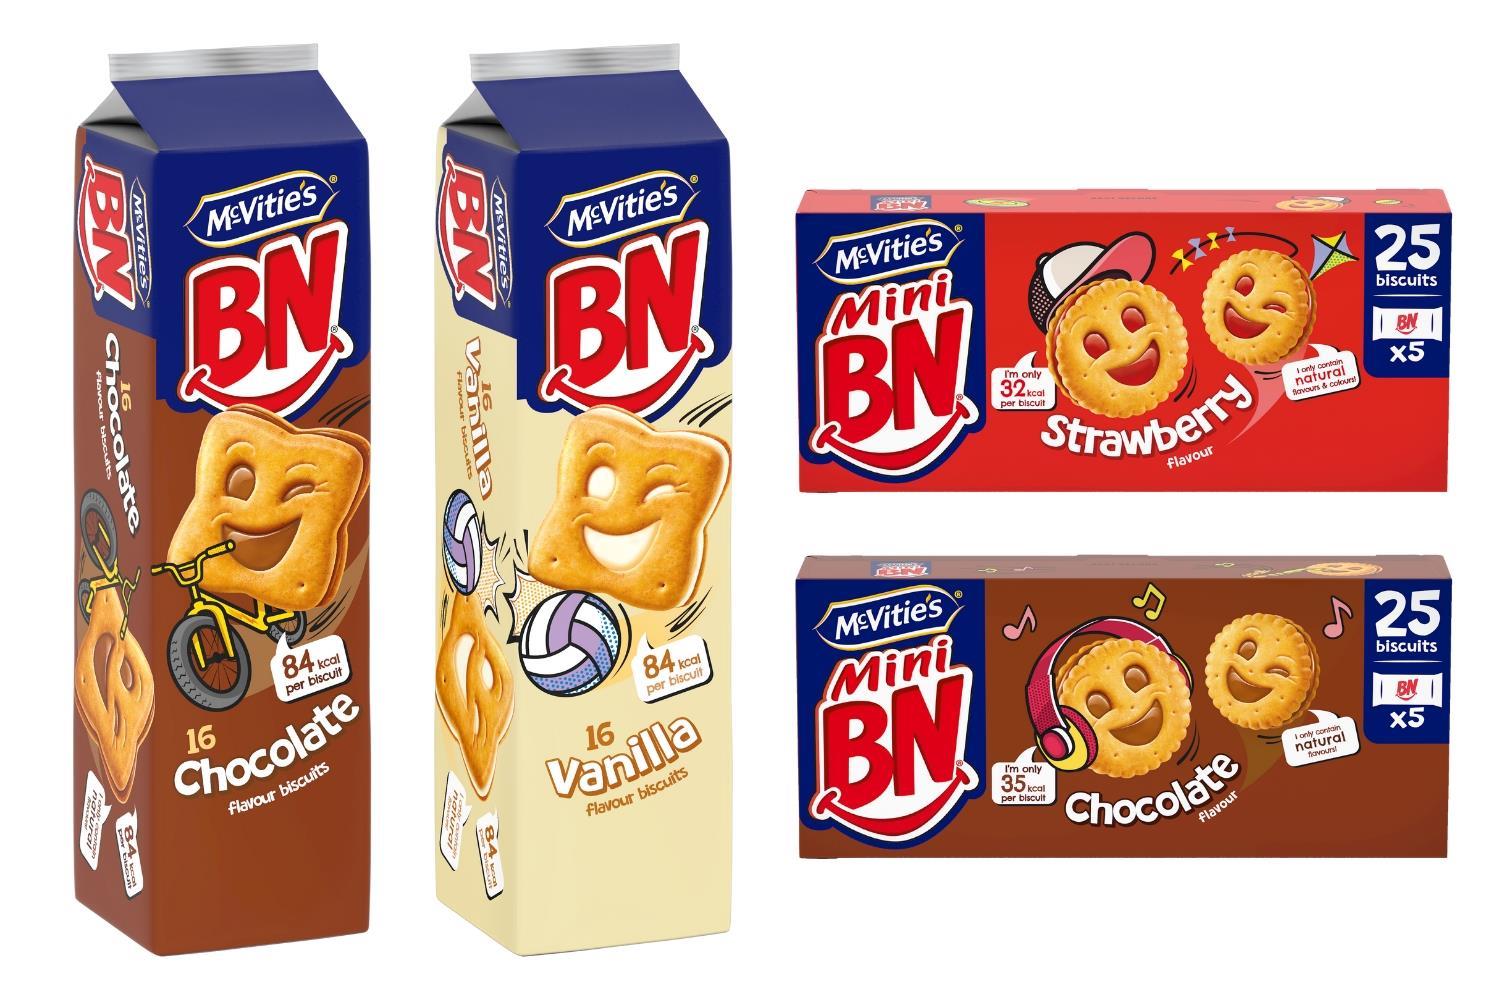 BN biscuits return after four years away, News